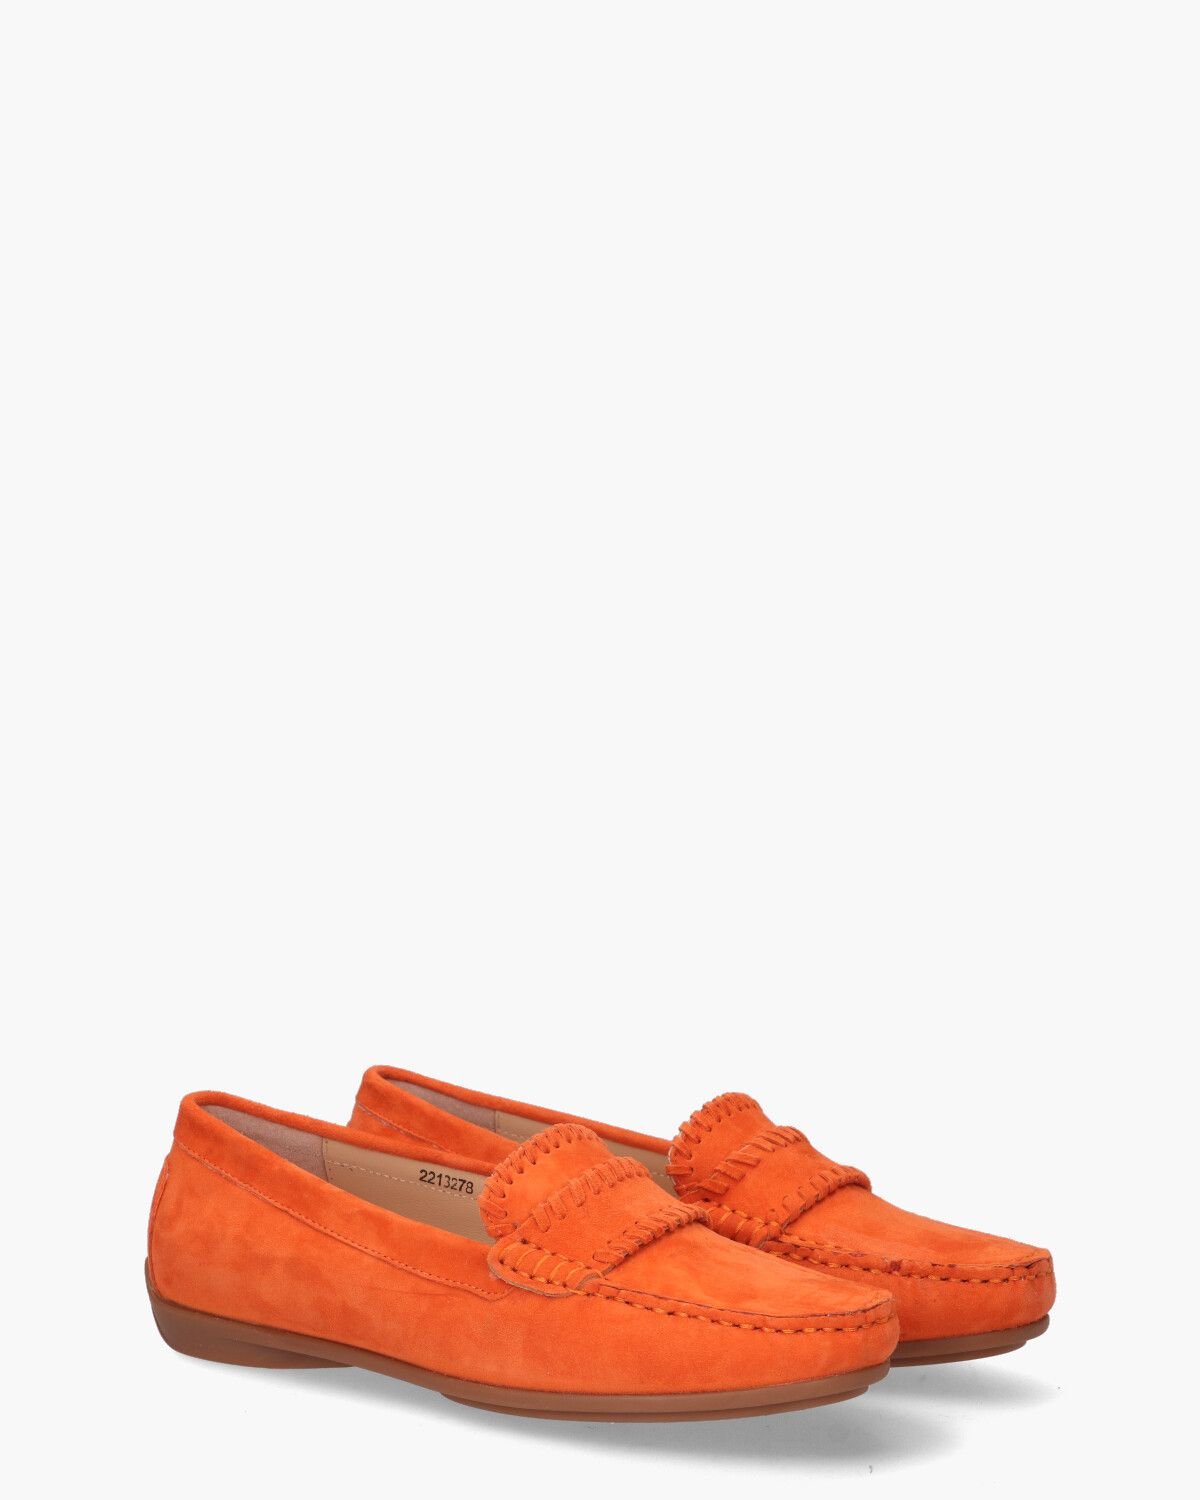 Oumay Oranje Damesloafers